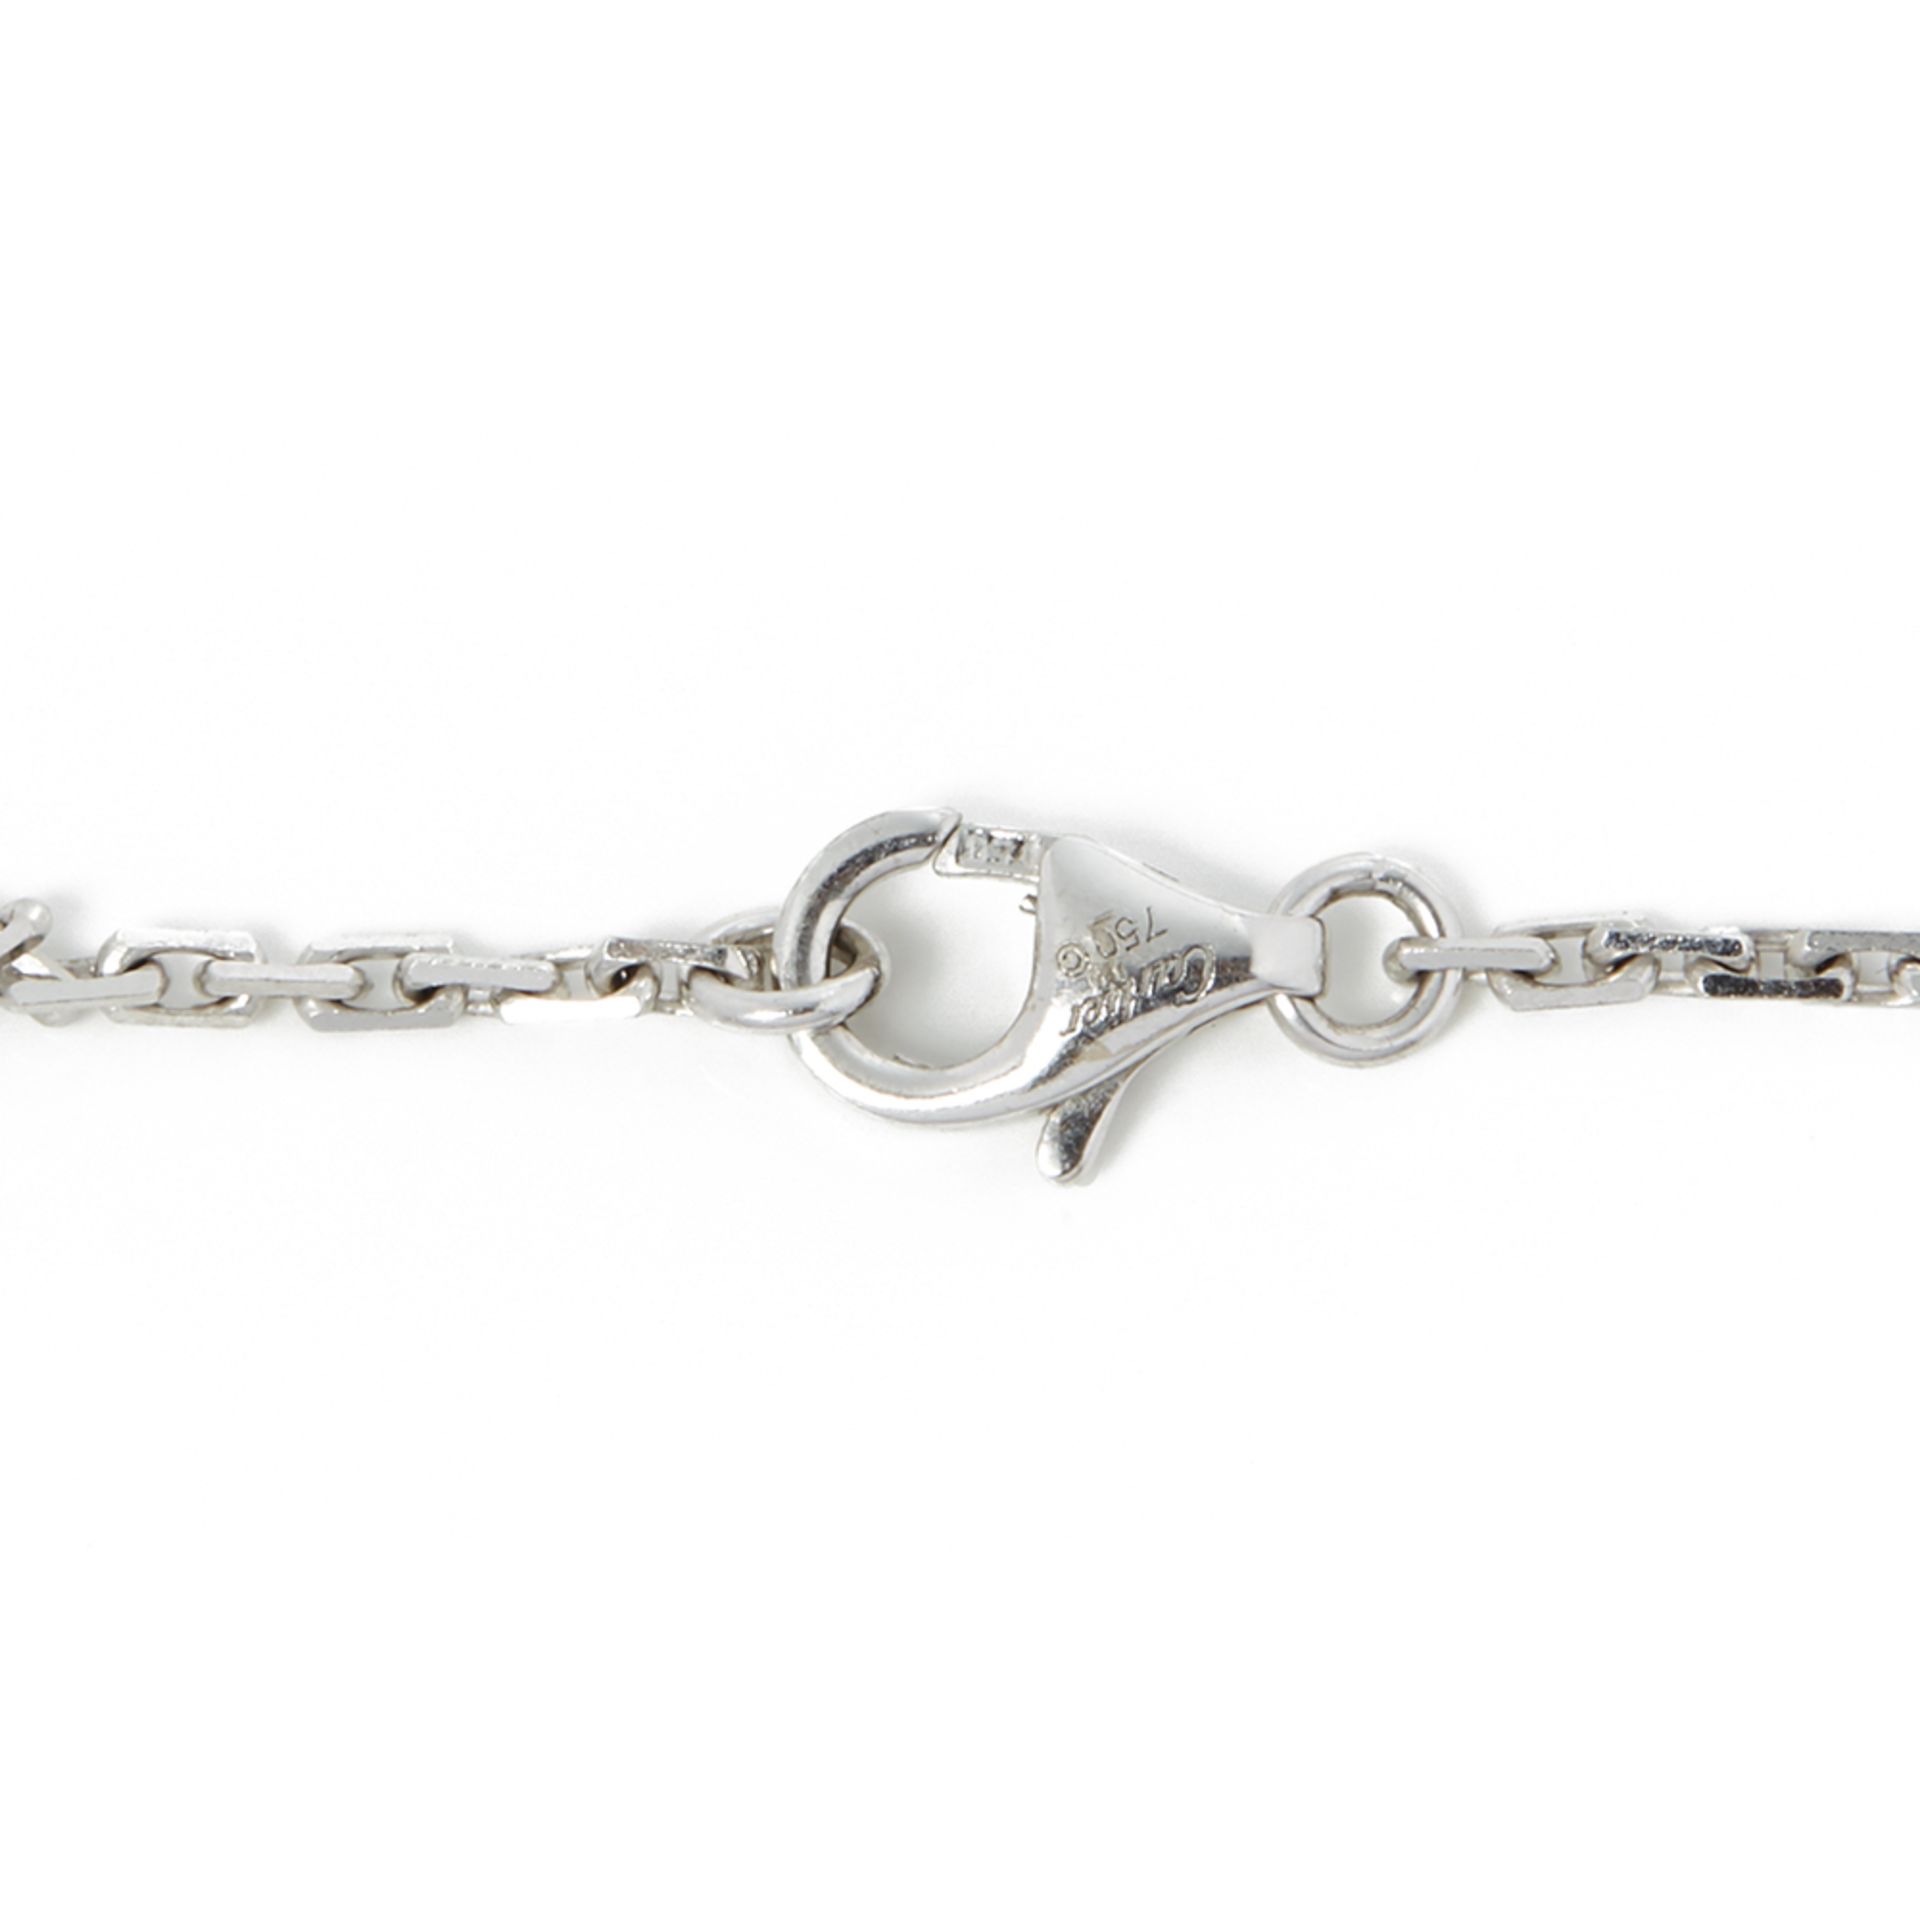 Cartier 18k White Gold Diamond Love Necklace - Image 3 of 6